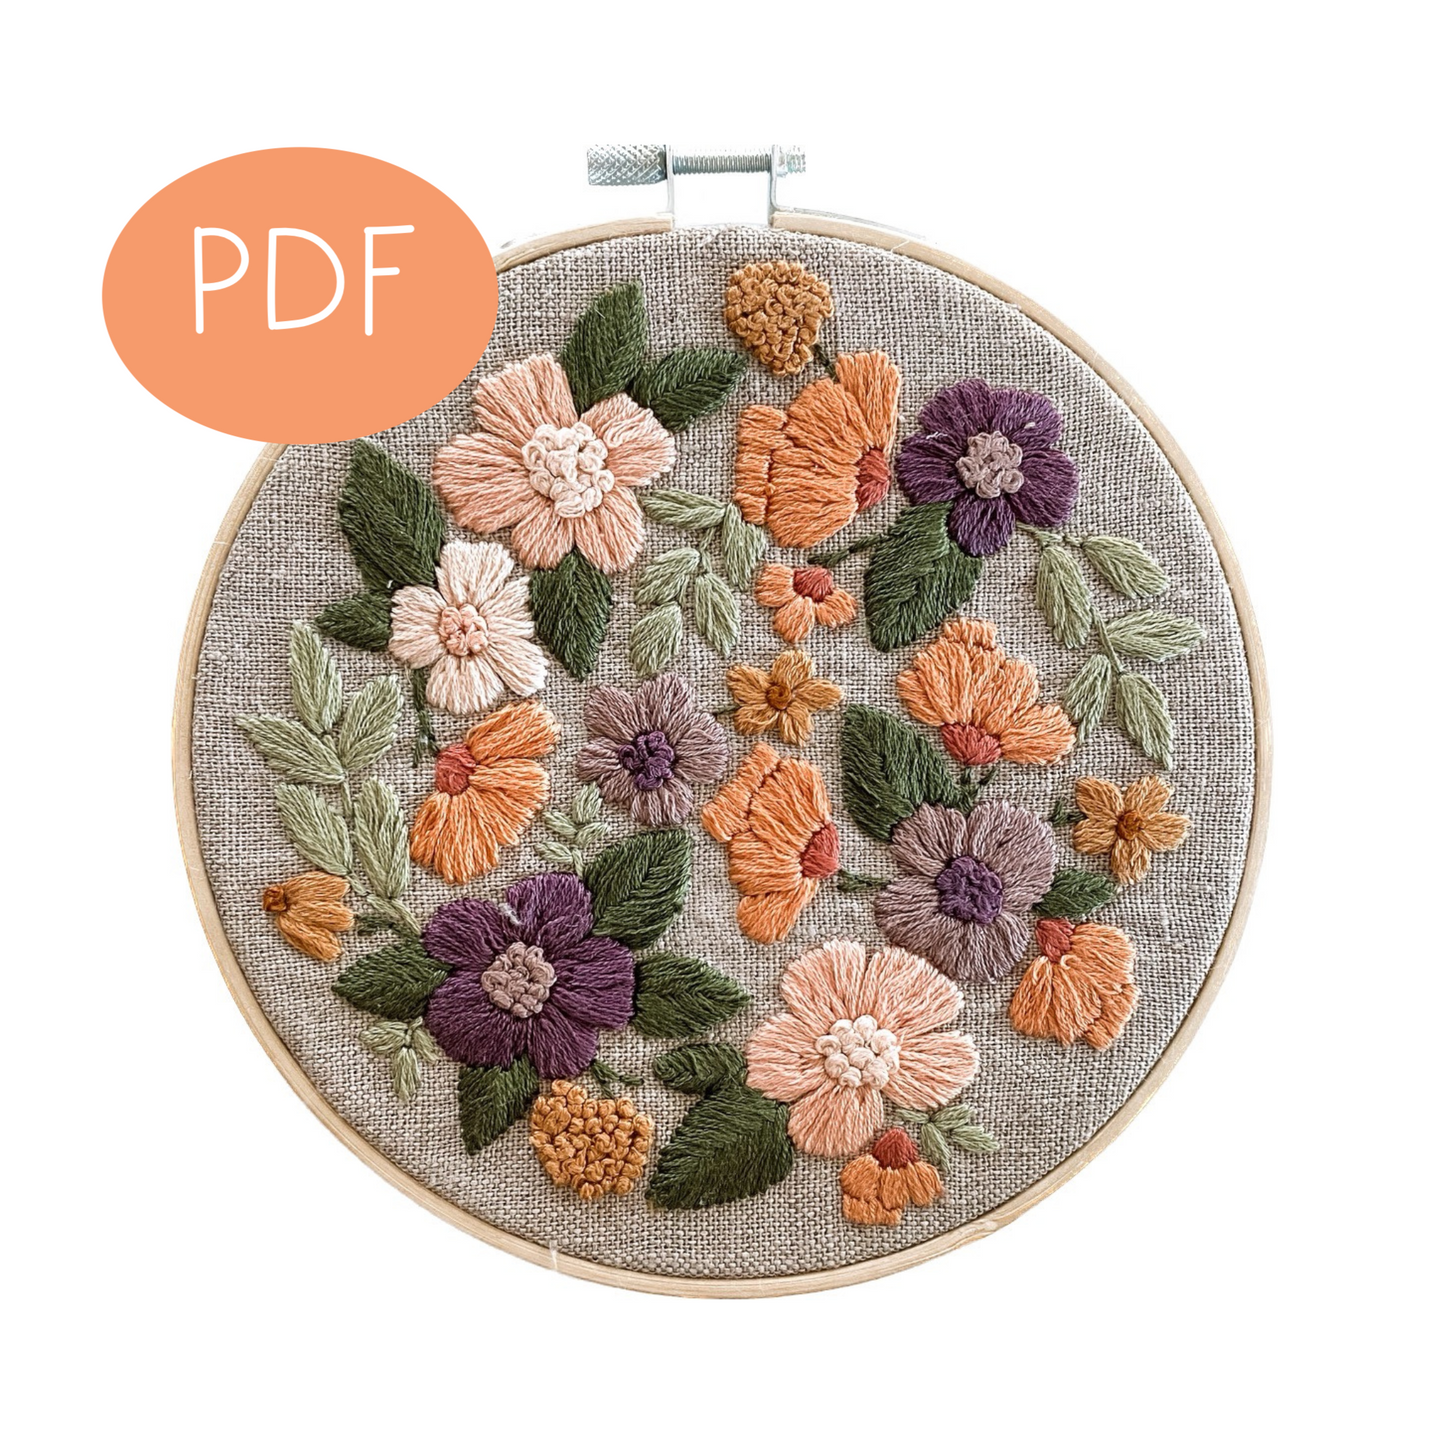 Peachy Poppies PDF Embroidery Pattern